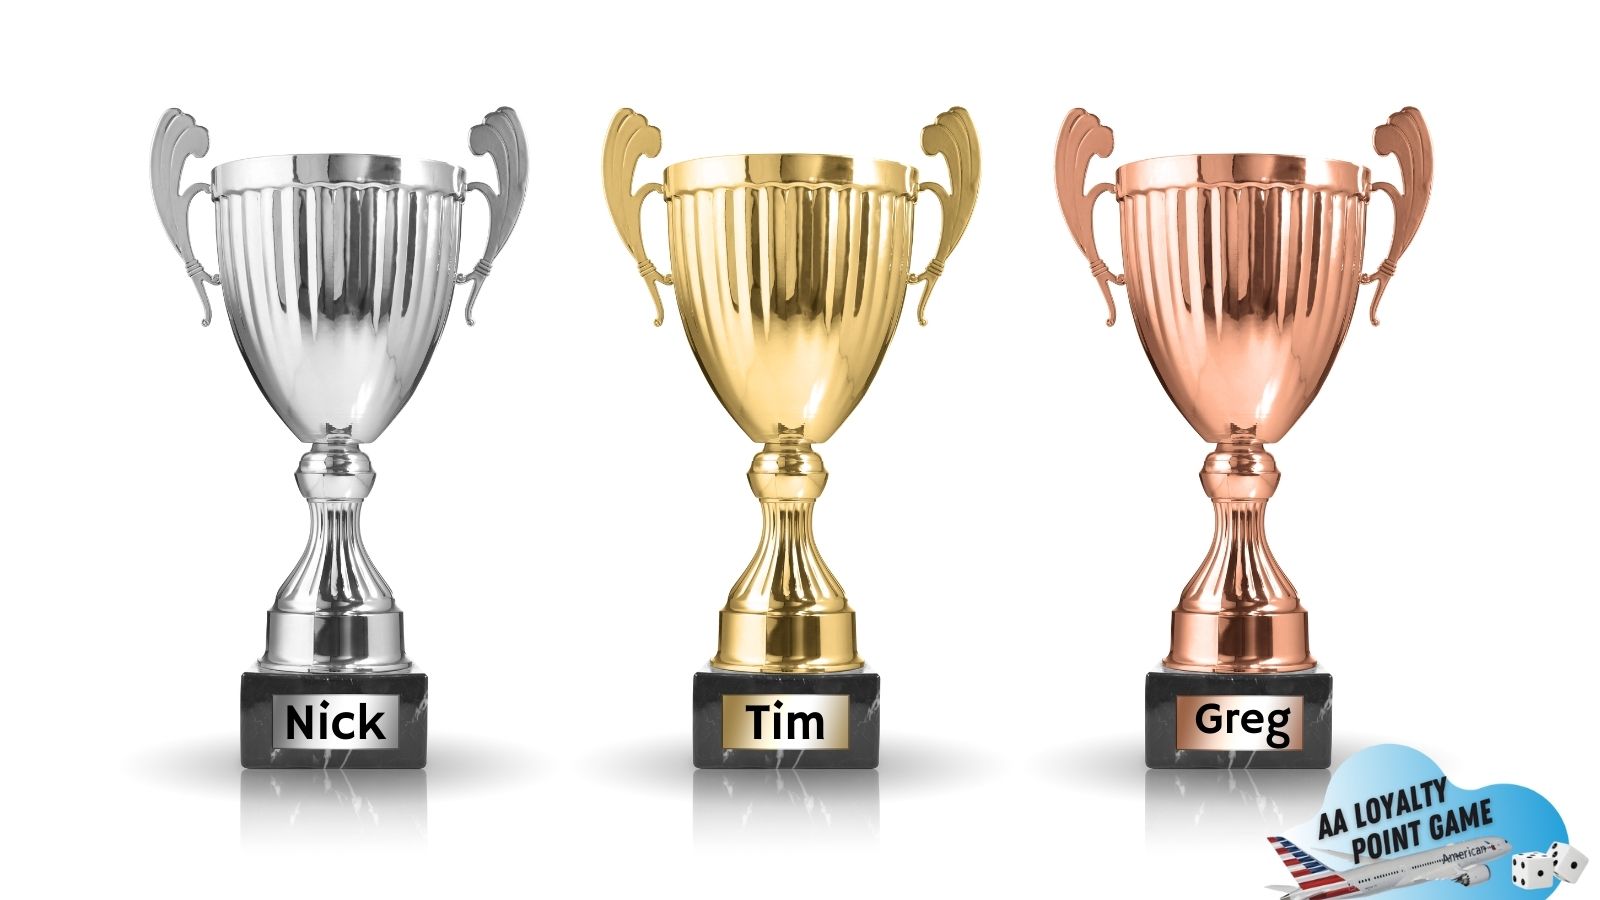 a group of trophies with text on them